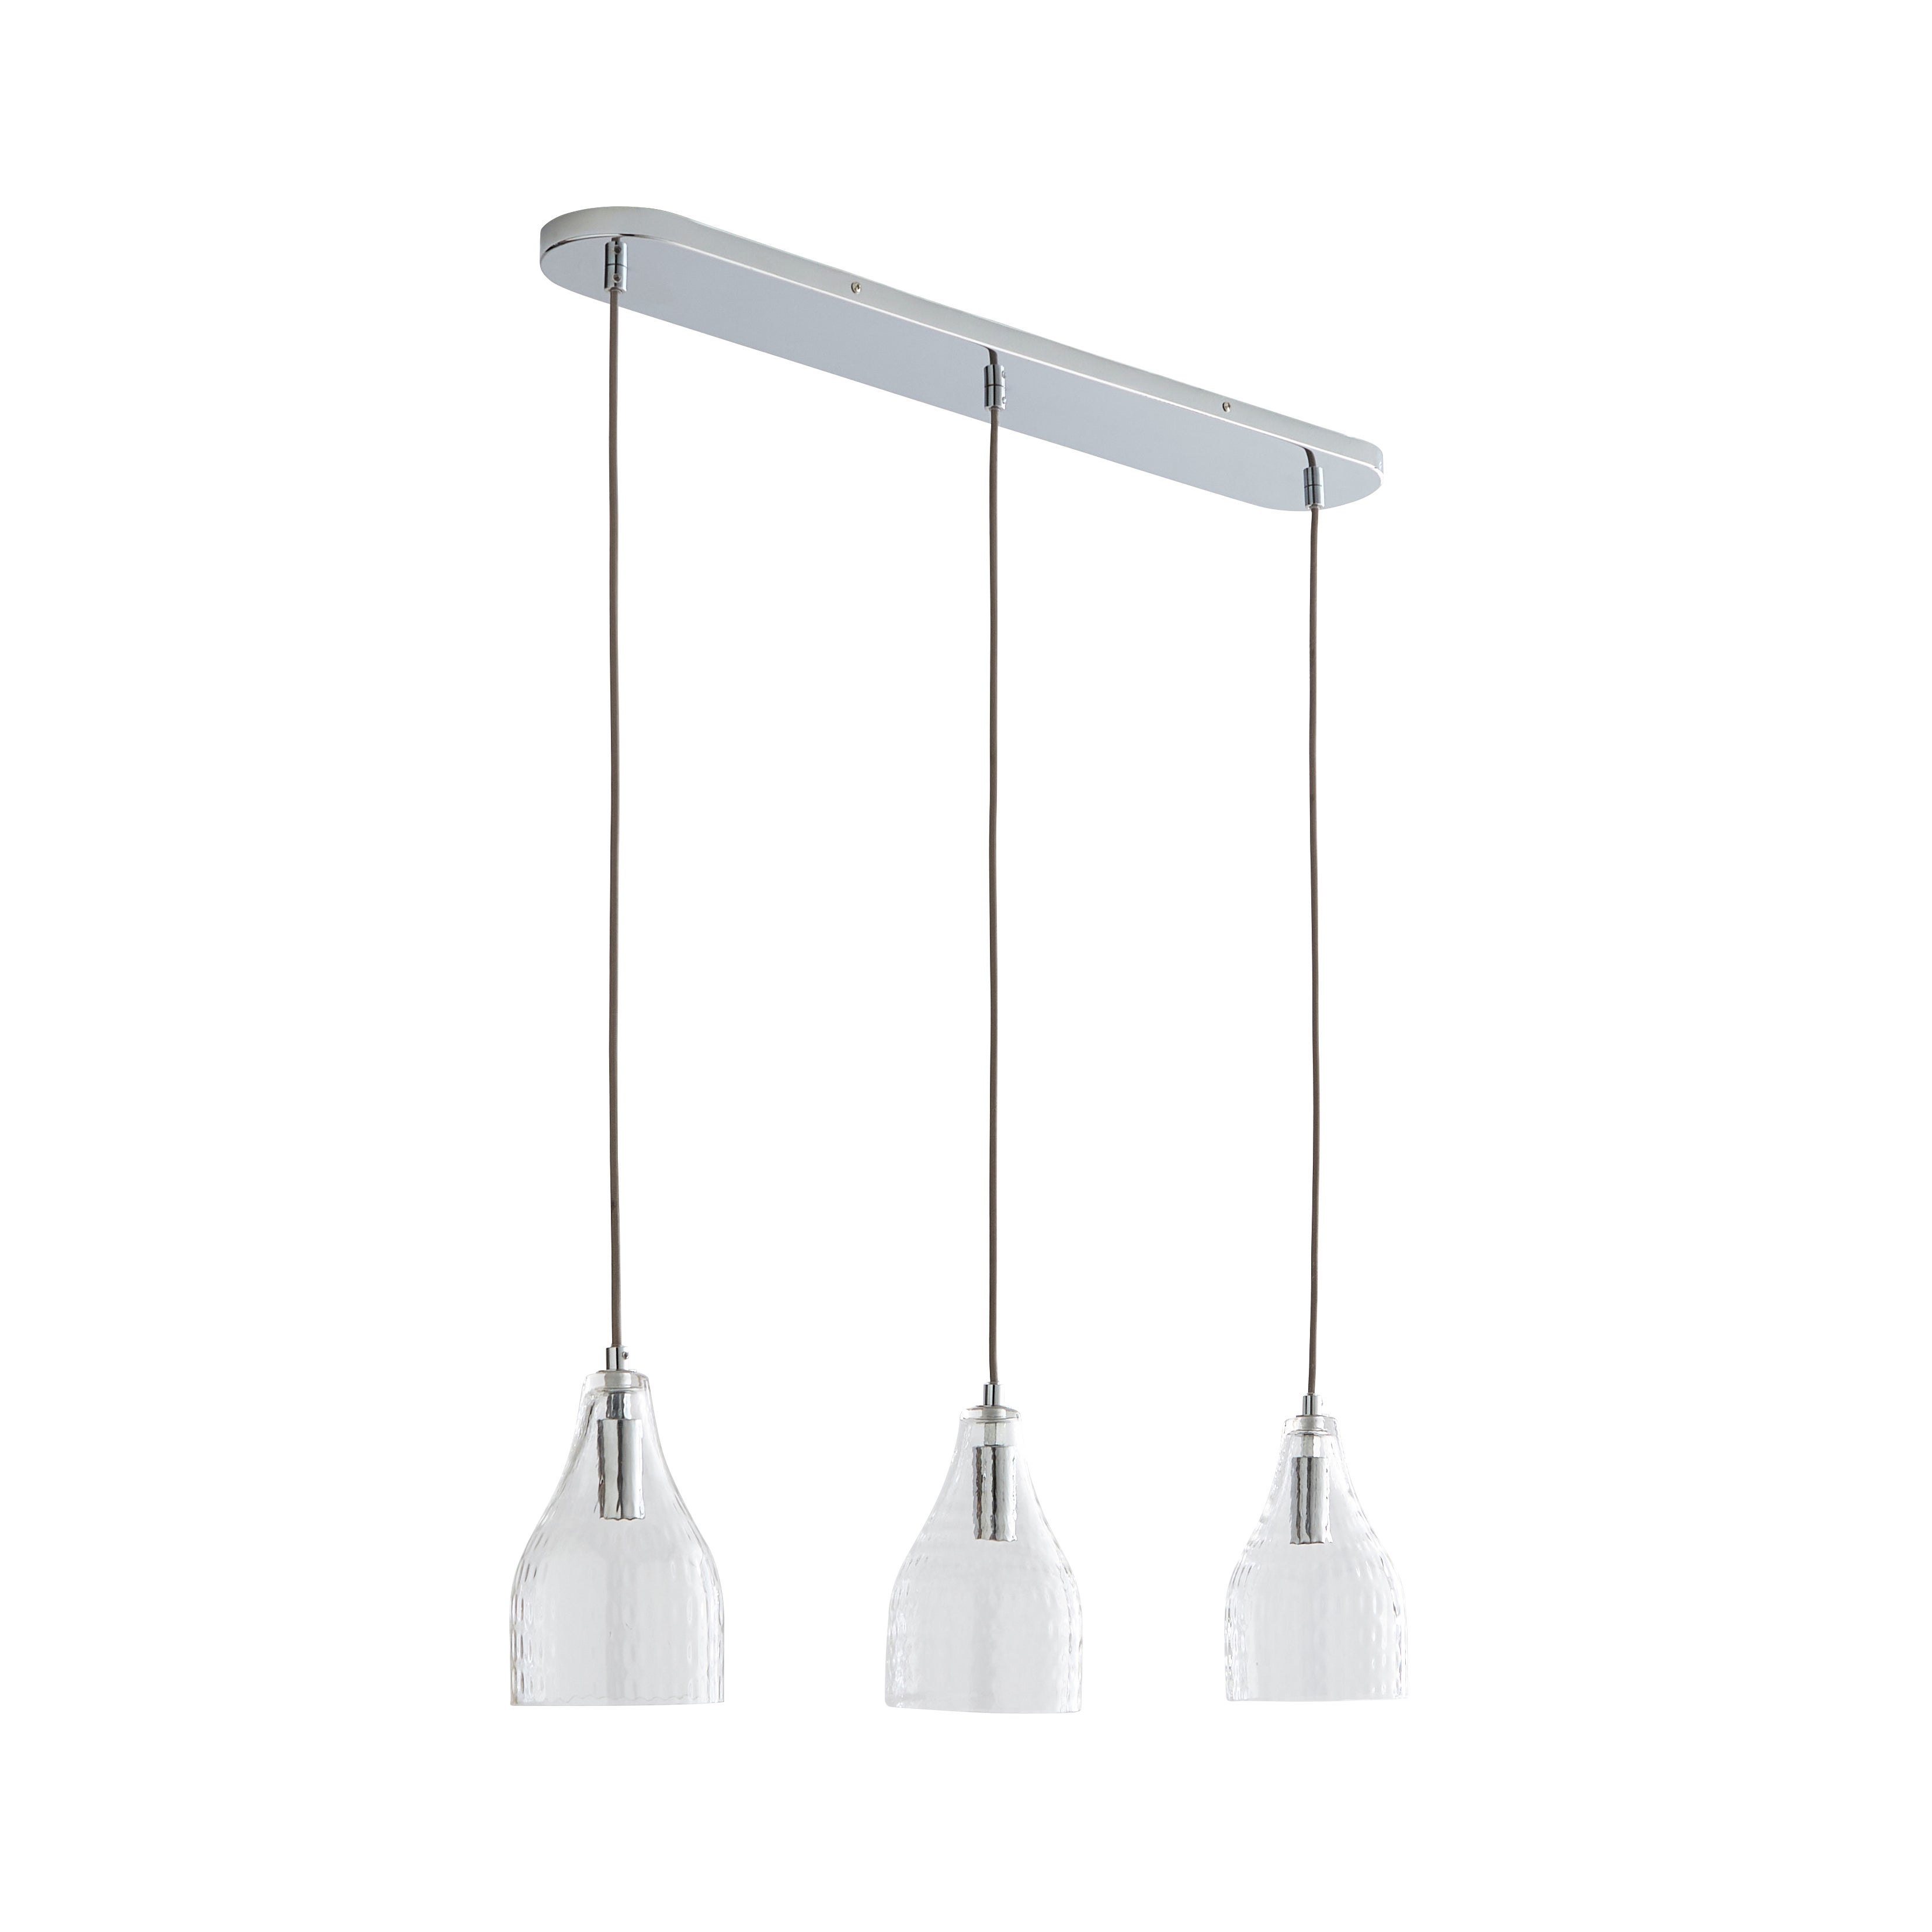 Hannam Recycled Glass 3 Light Diner Ceiling Fitting | Dunelm